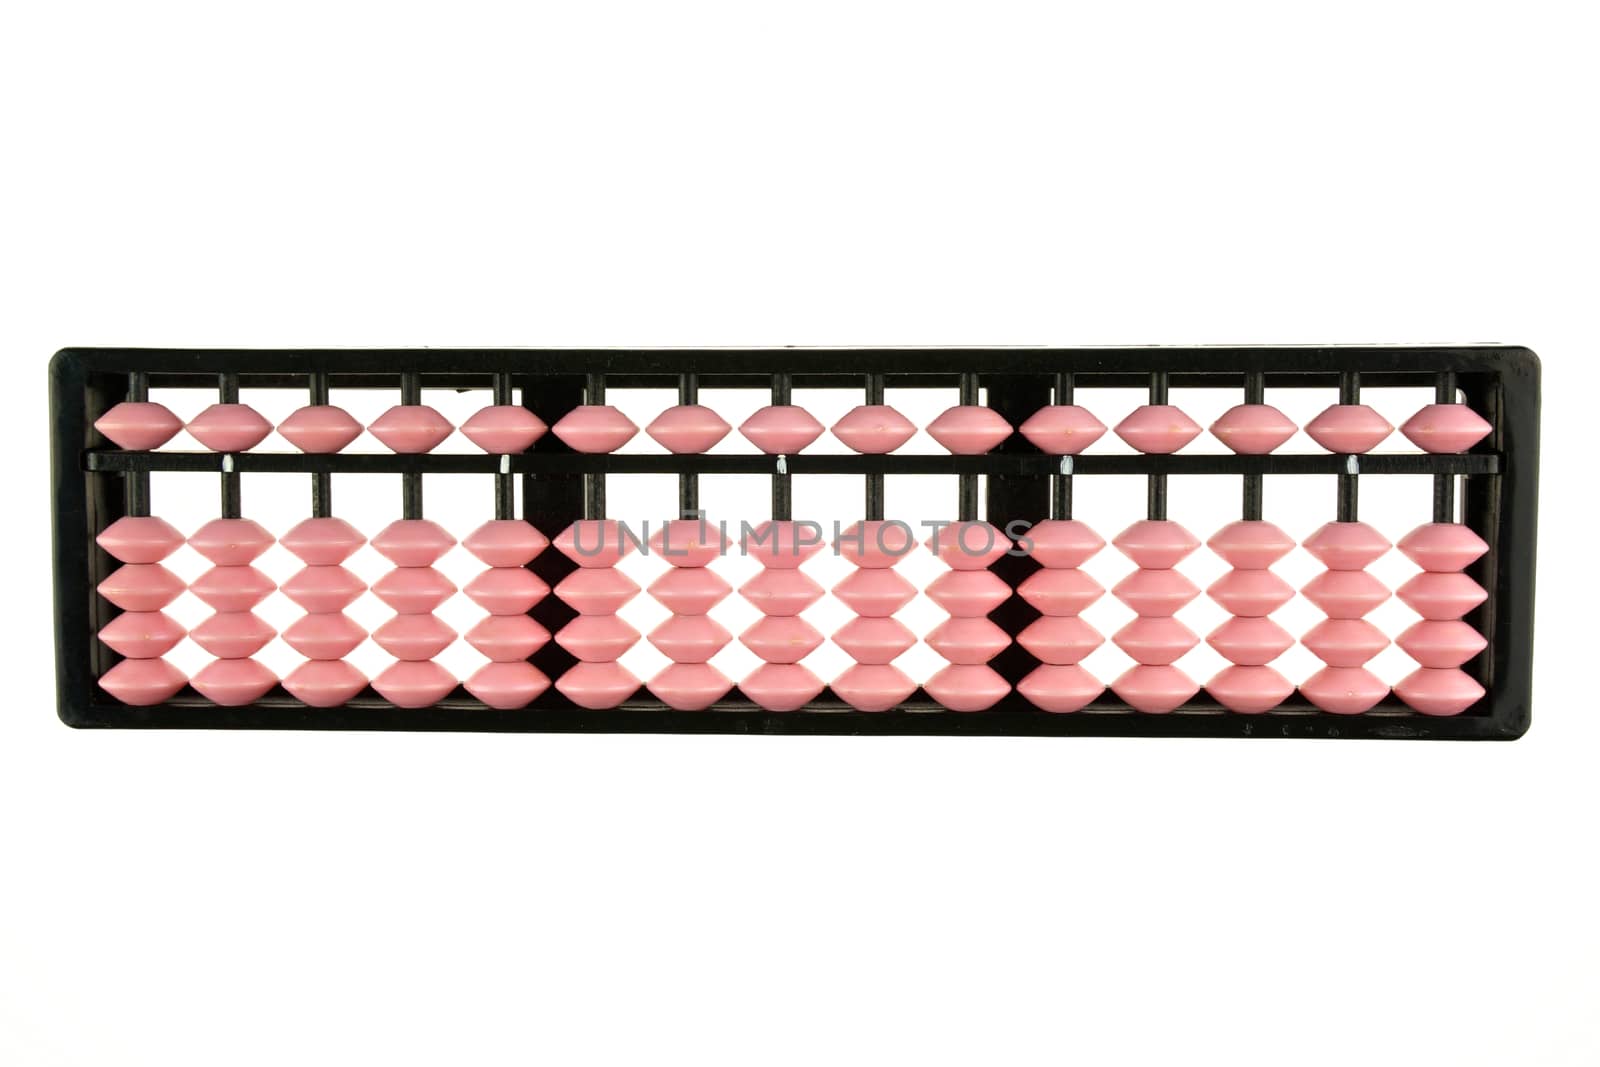 Pink and black abacus retro japan calculator isolated by eaglesky